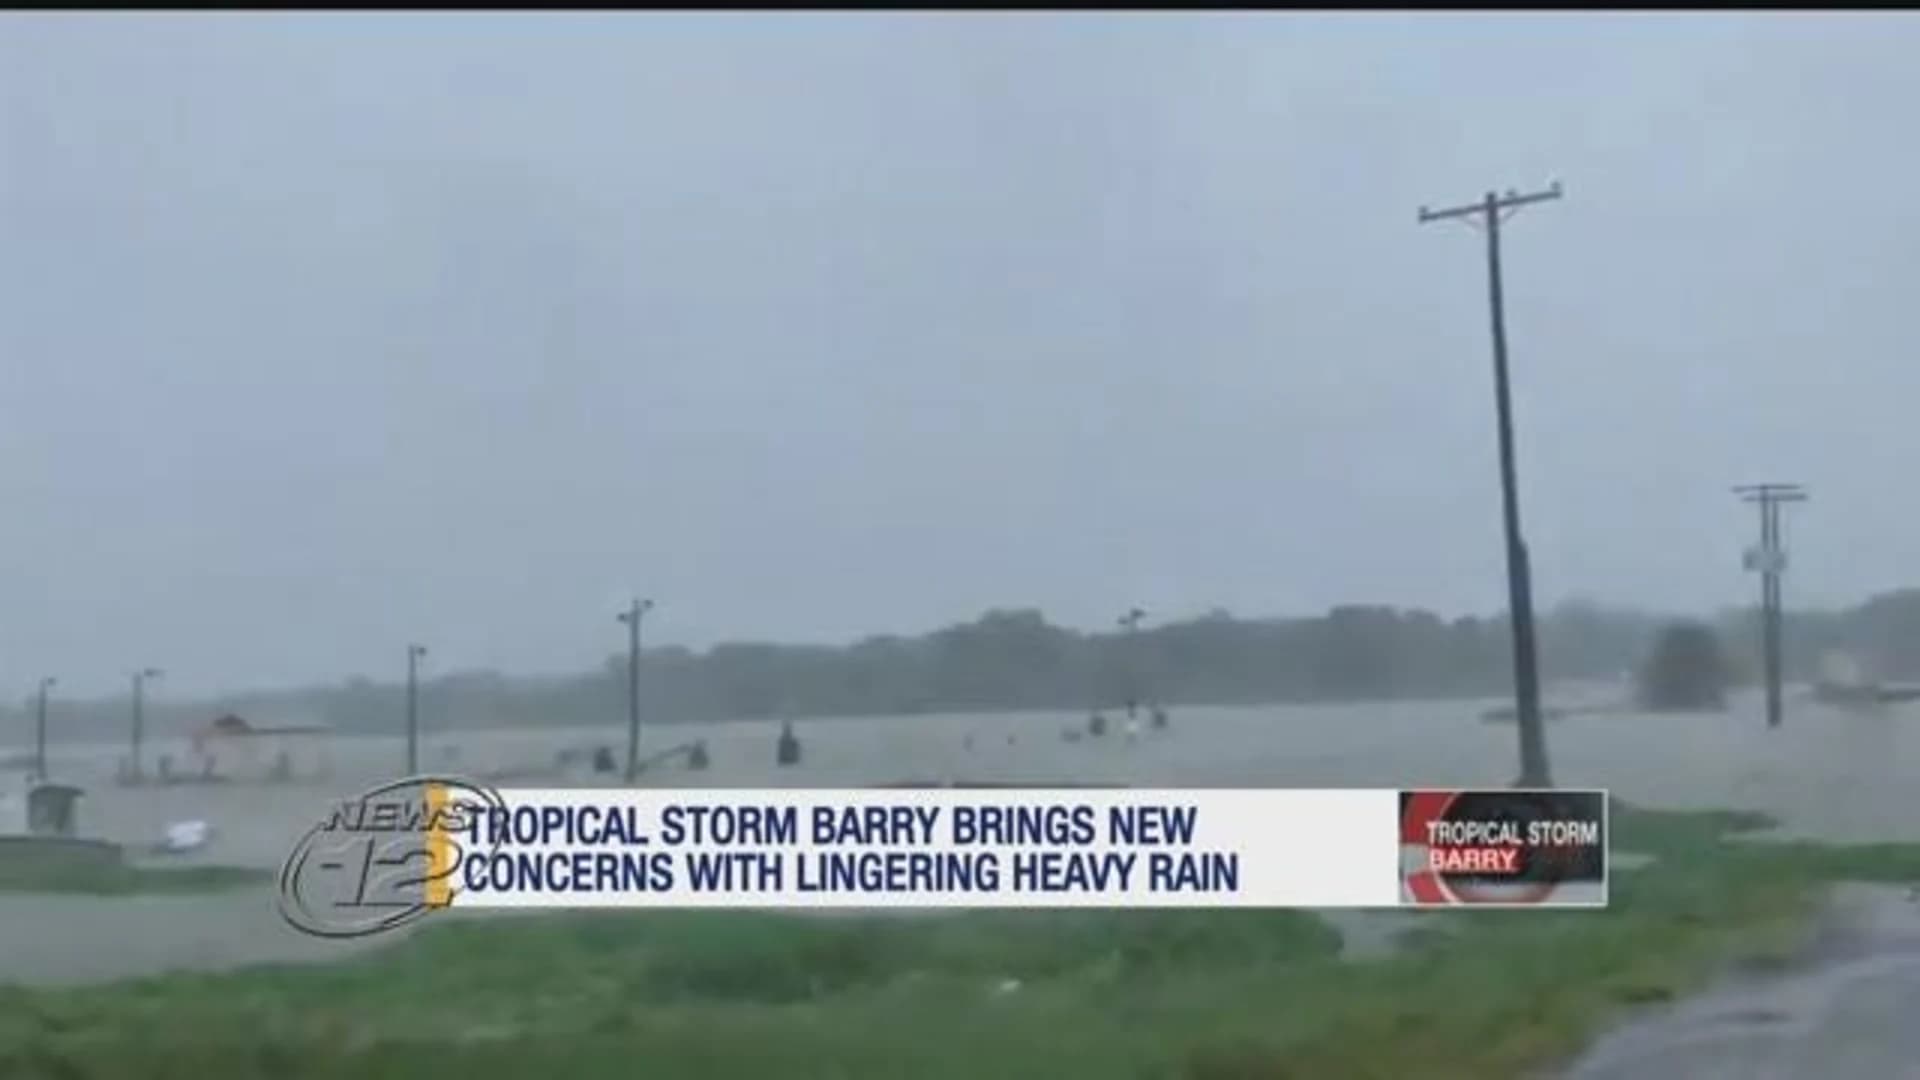 Gulf Coast keeps guard up as Barry continues drenching